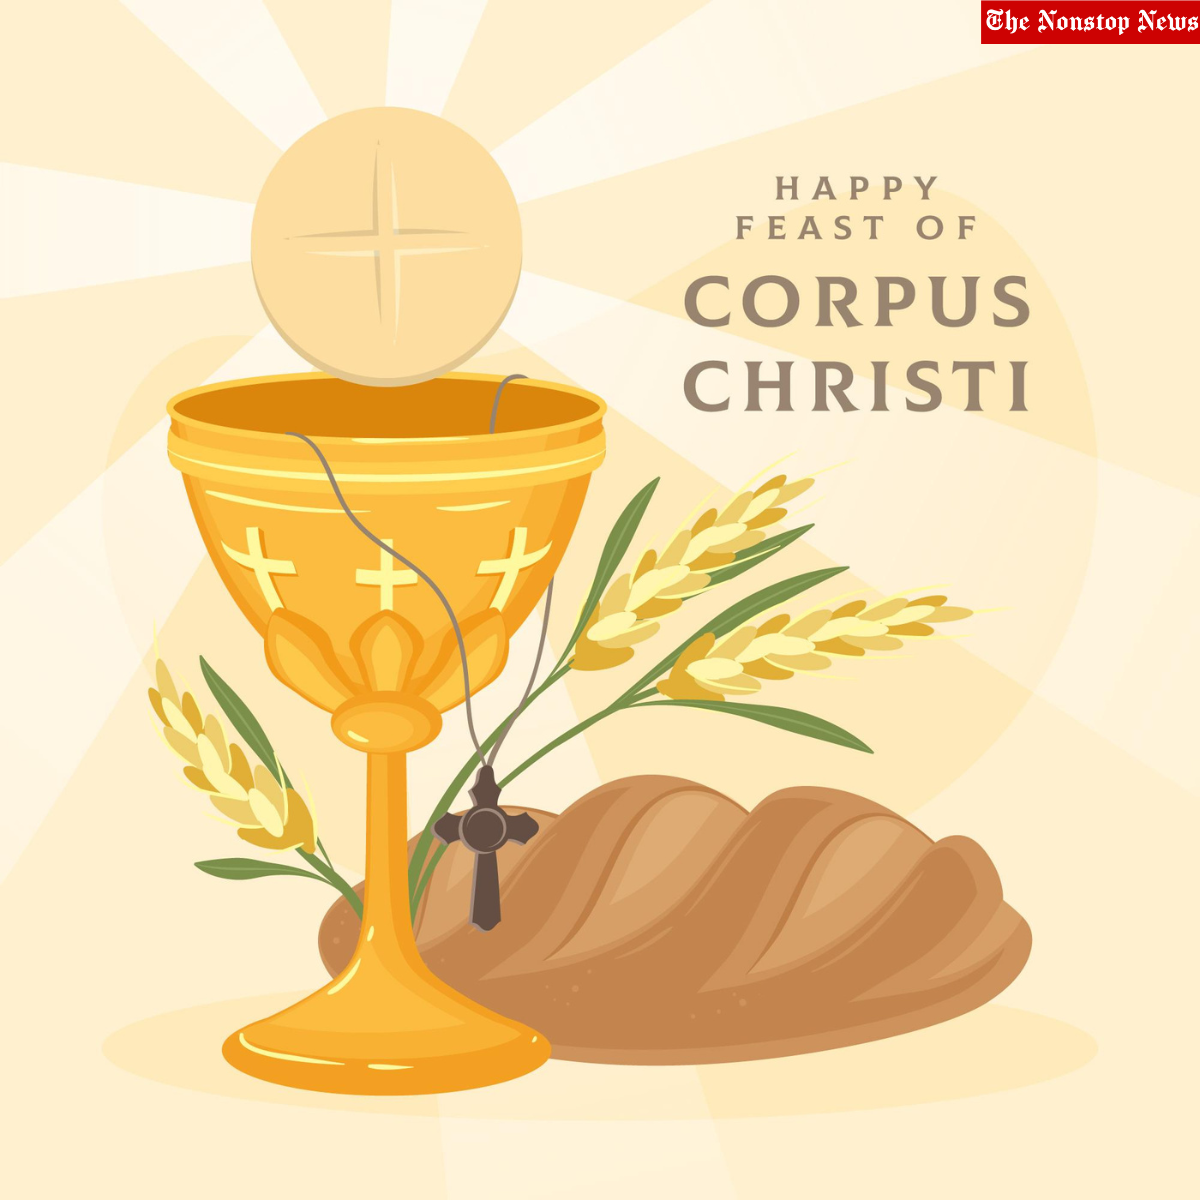 Corpus Christi feast 2022: Wishes, Images, Quotes, Prayers, Sayings, Captions to Share